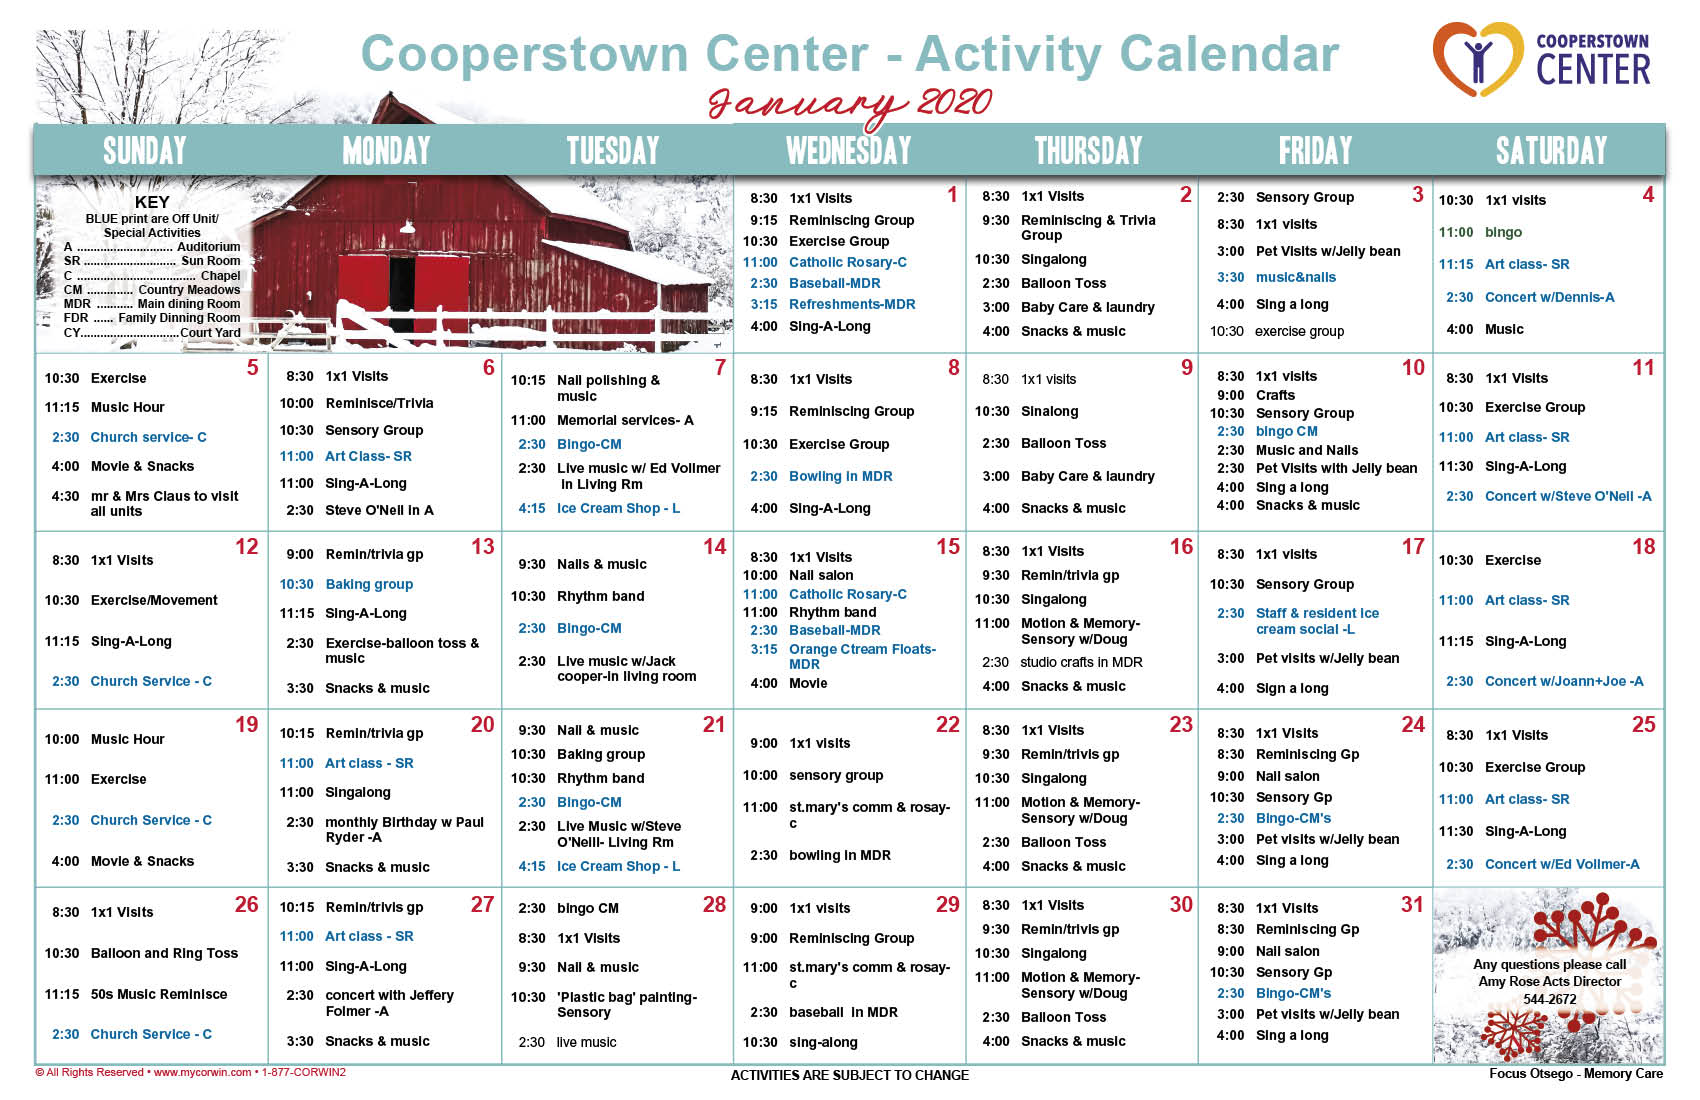 Cooperstown Center Centers Health Care Nursing and